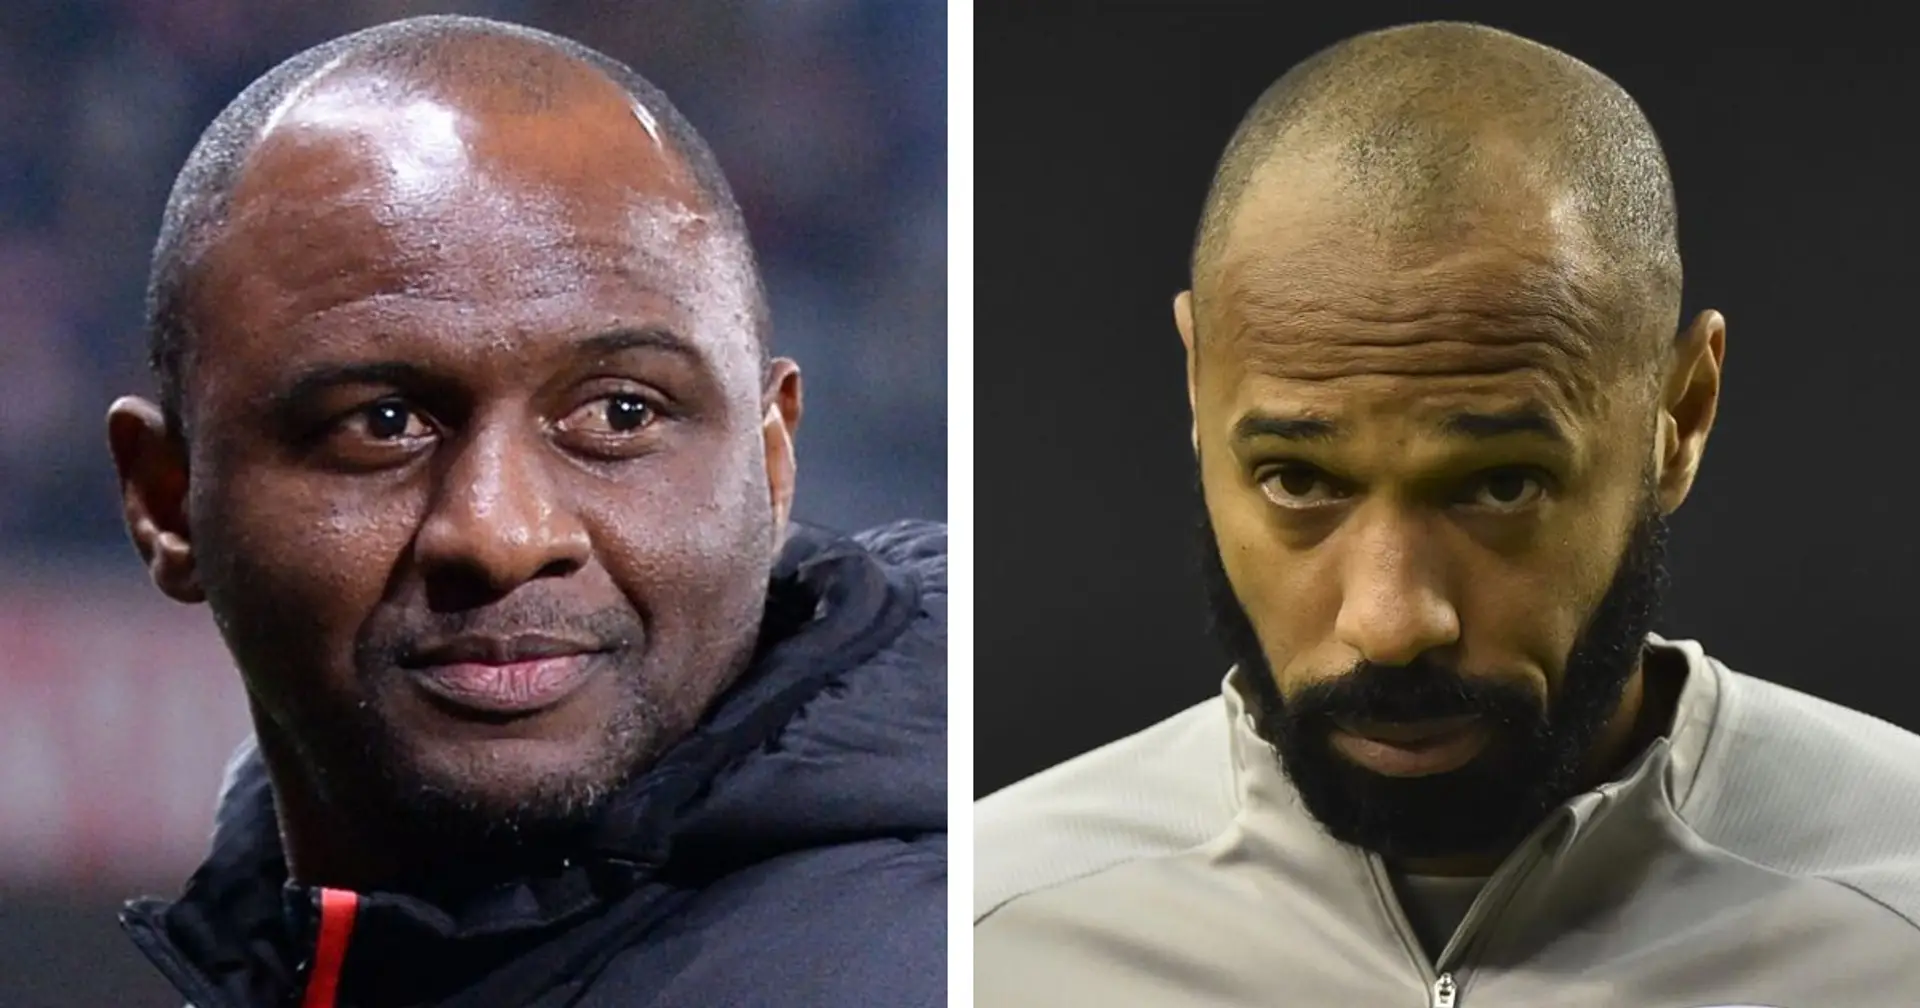 'Why does Vieira have to go to New York and Henry to Canada?': Seedorf slams racial bias in football